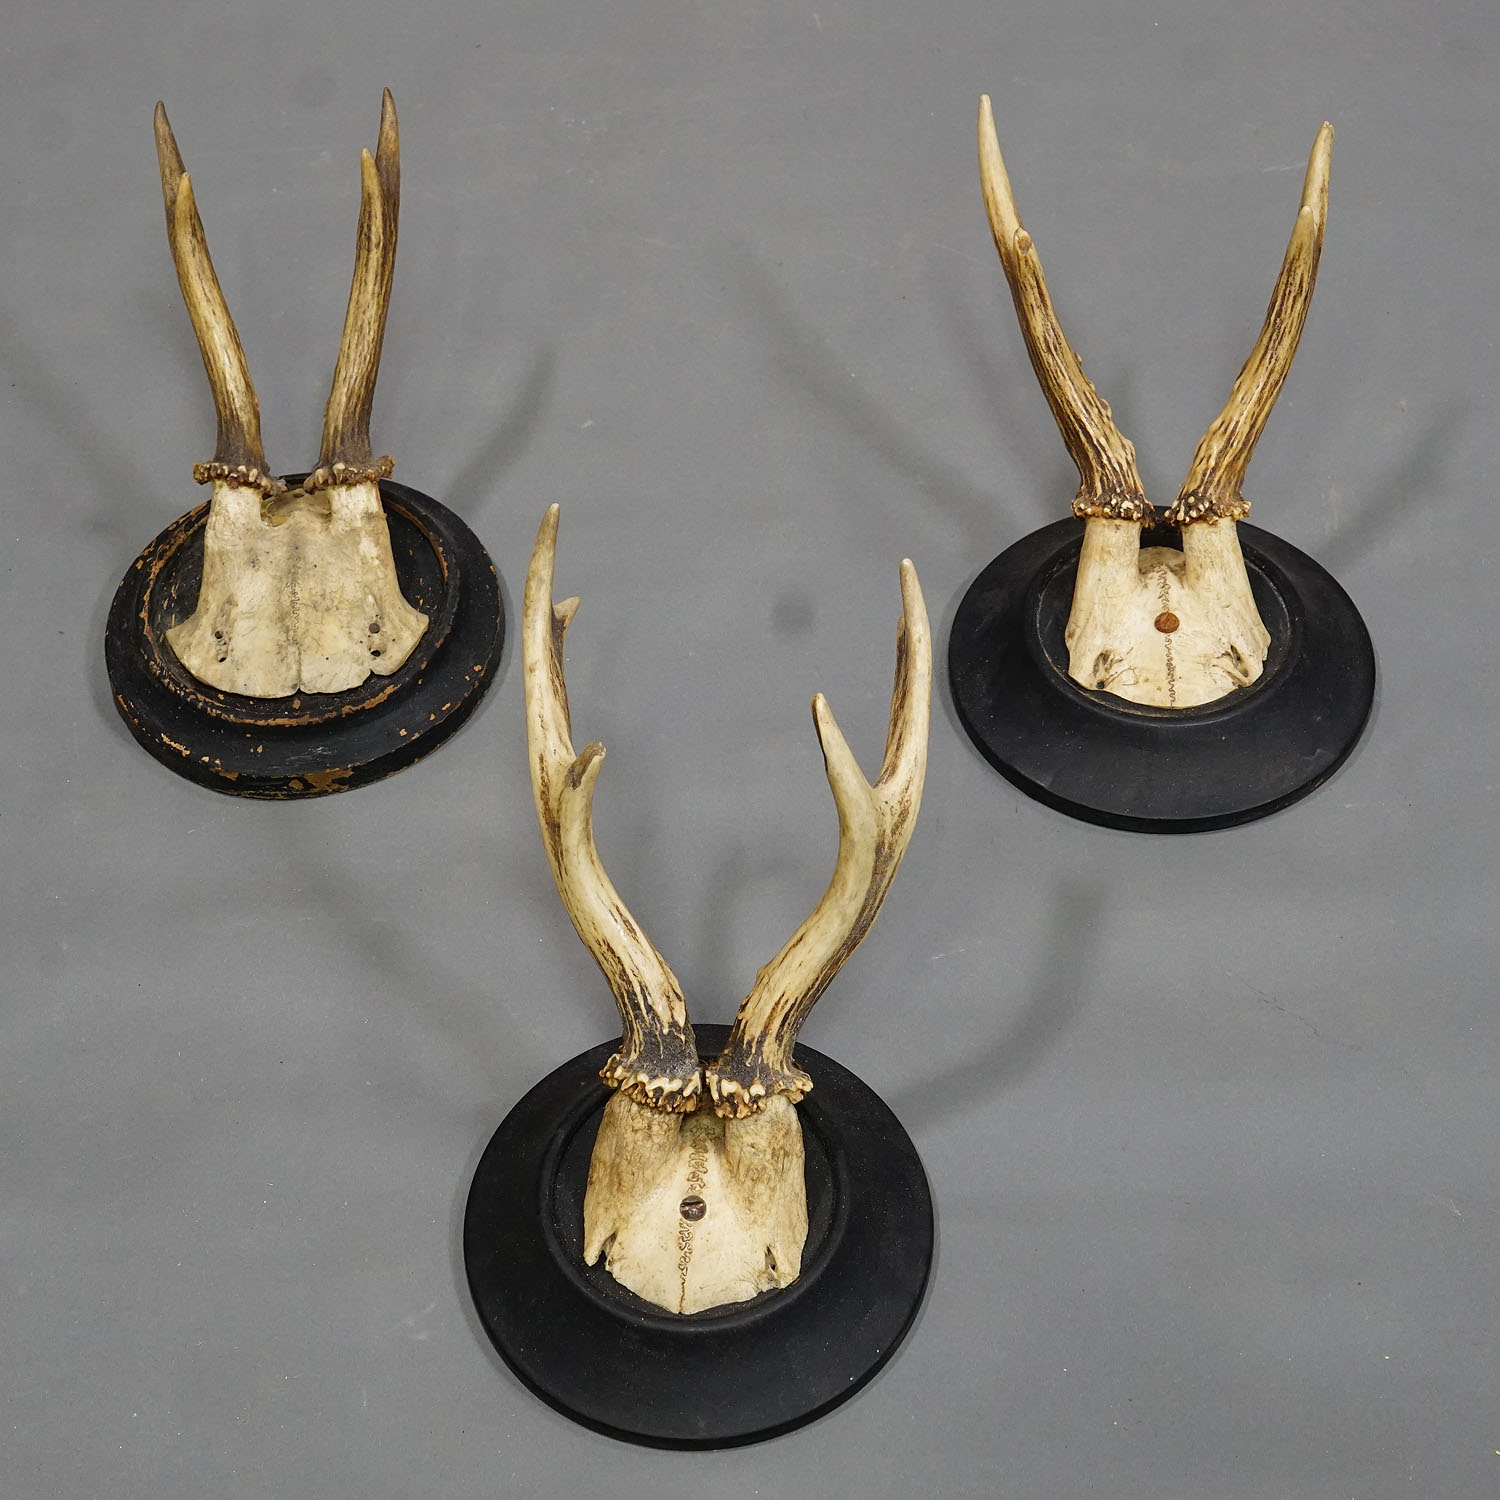 Six Antique Roe Deer Trophies on Wooden Plaques Germany ca. 1930s